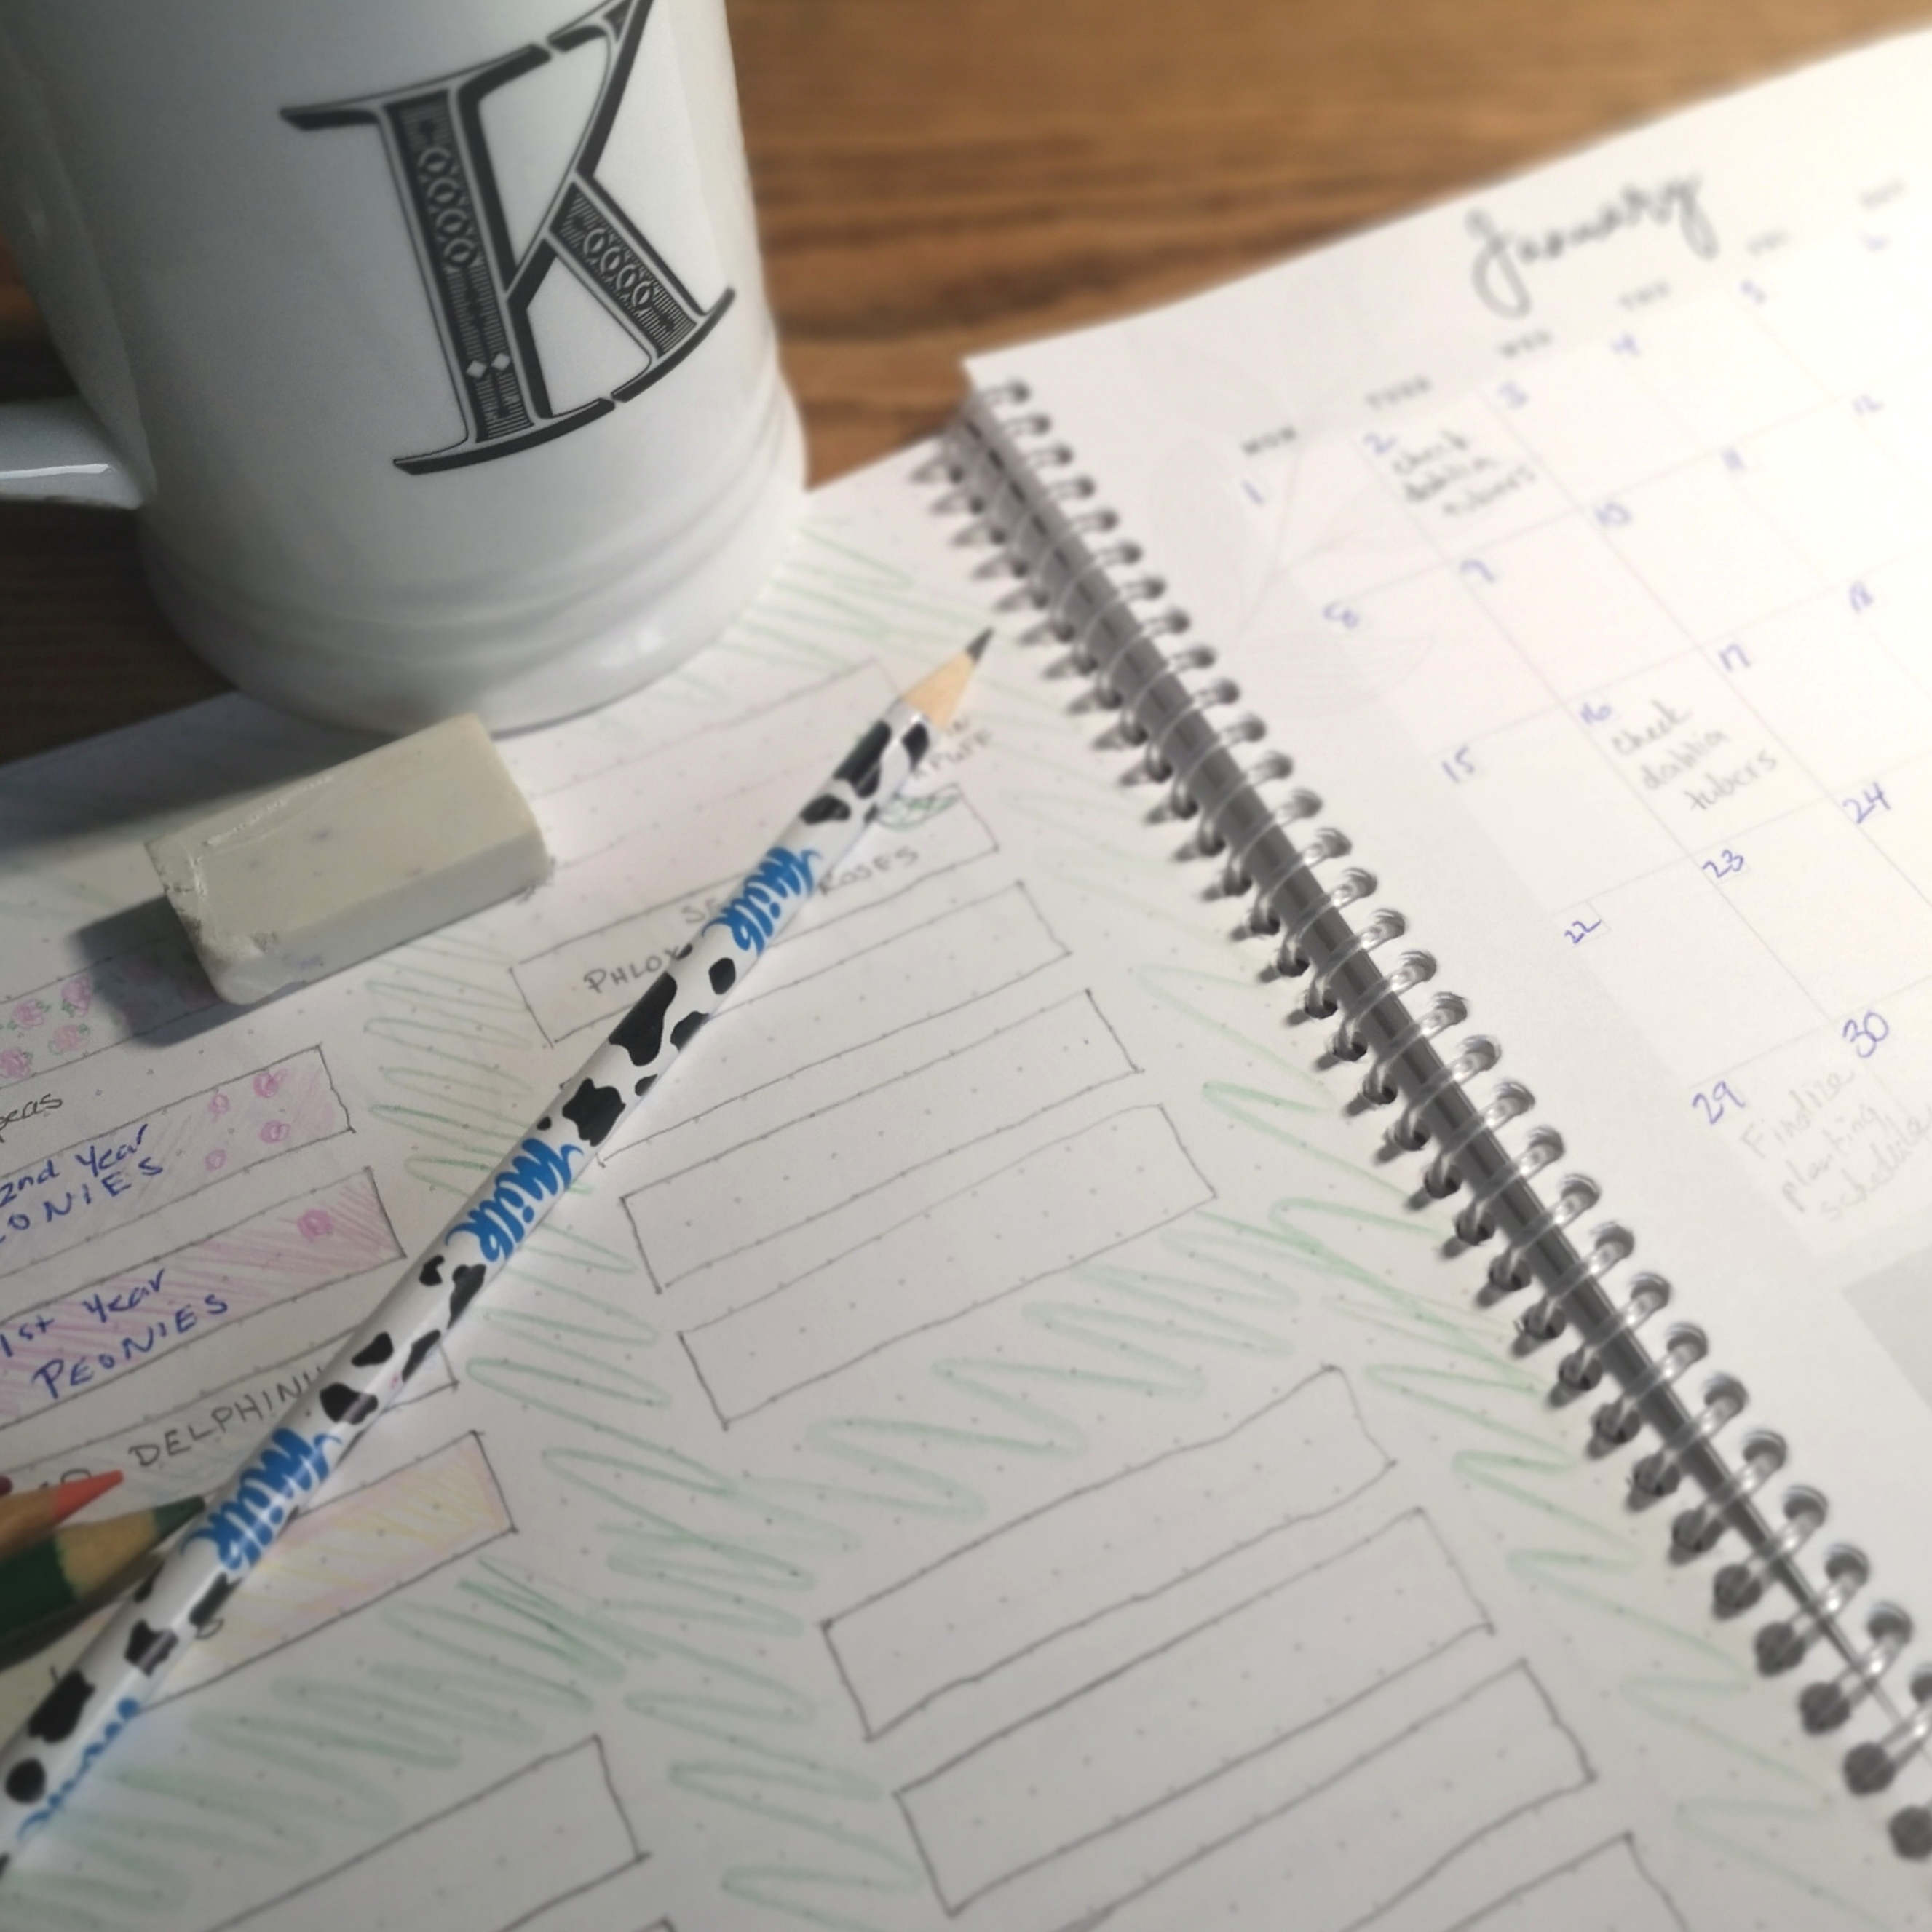 Image of January calendar and drawing of garden plans